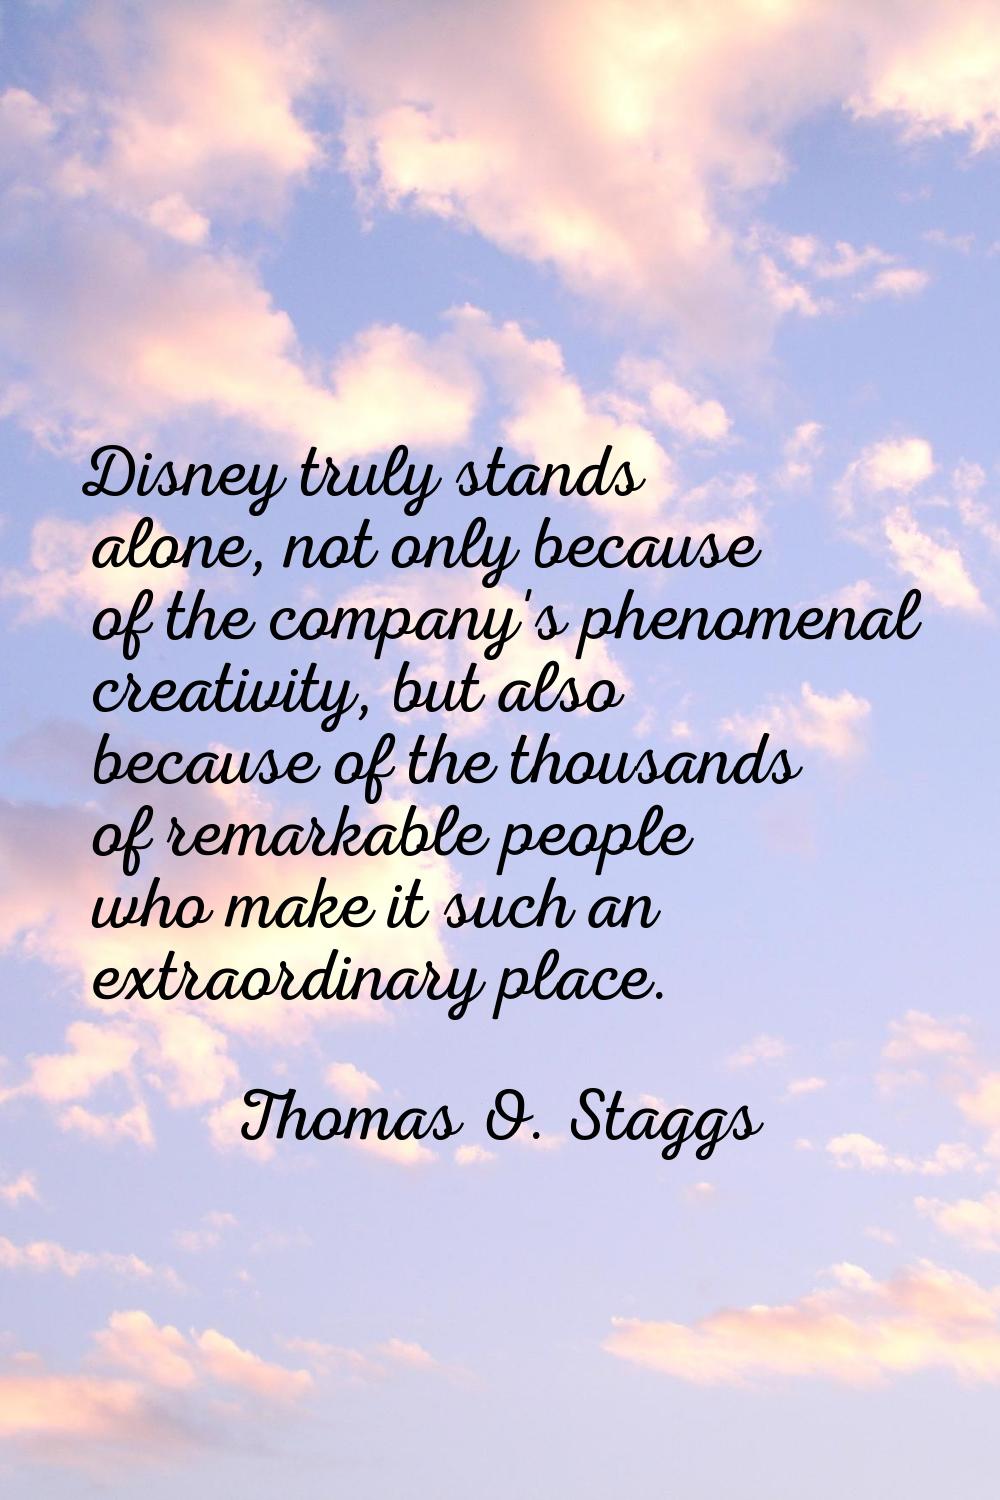 Disney truly stands alone, not only because of the company's phenomenal creativity, but also becaus